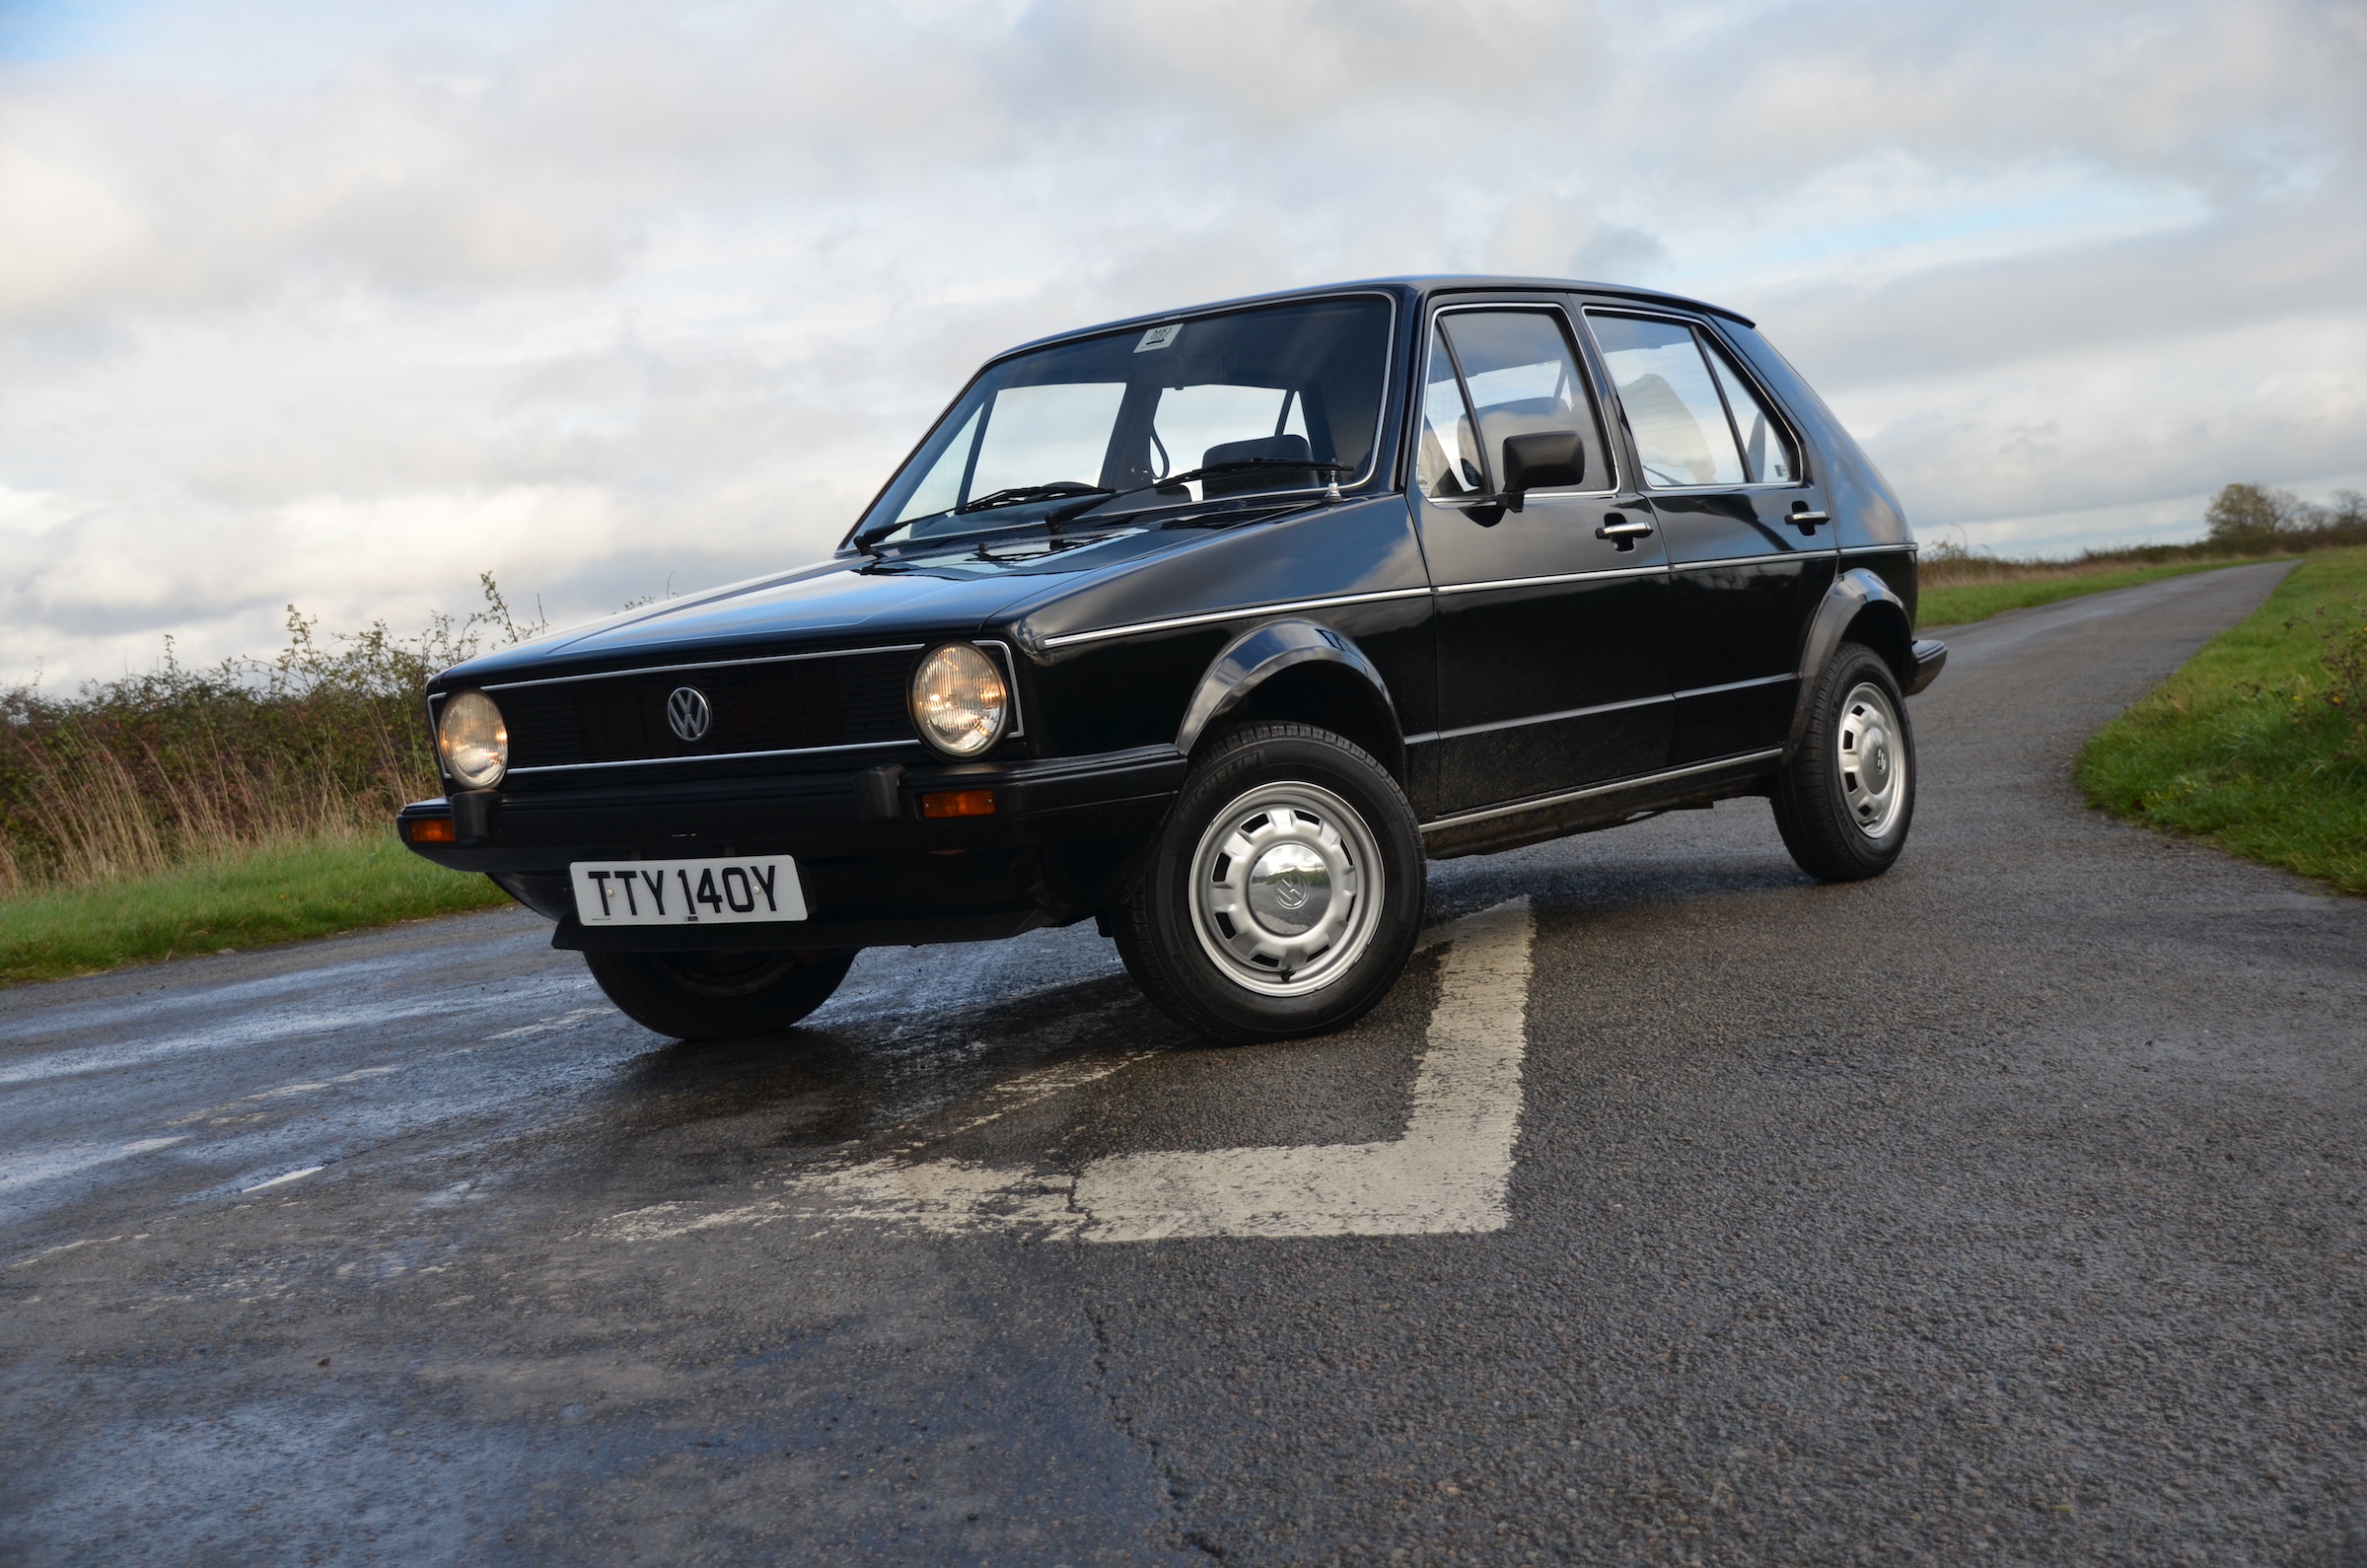 Volkswagen Golf Mk1: Driving the definitive family classic